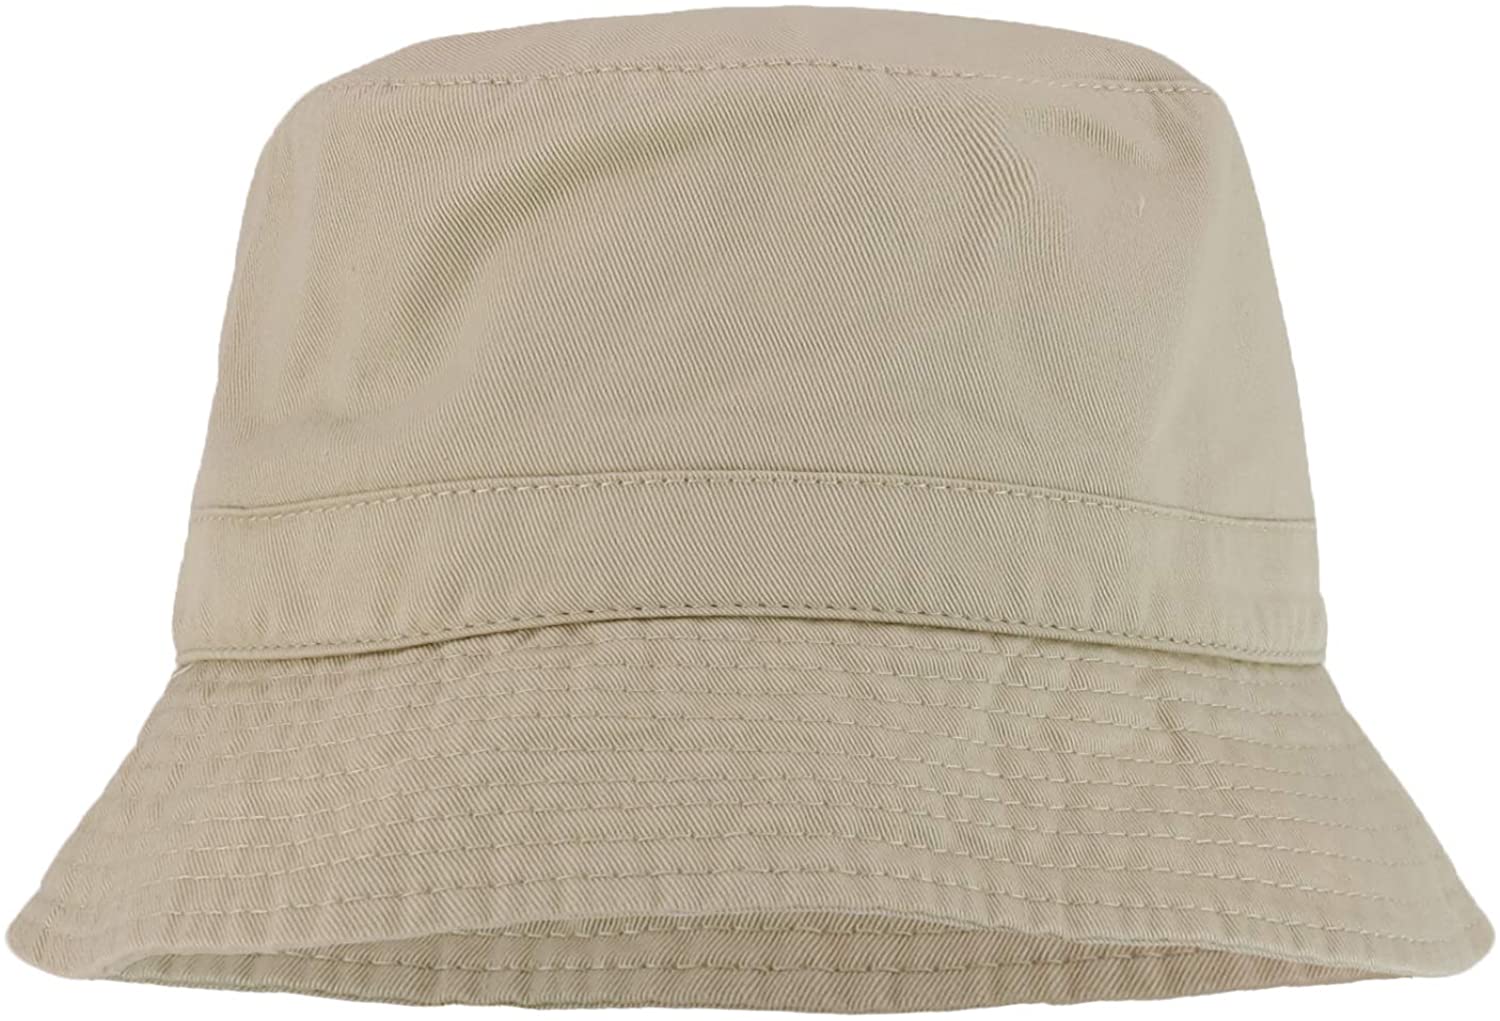 Armycrew Soft Cotton Fisherman Polo Bucket Hat - Stone - S-M